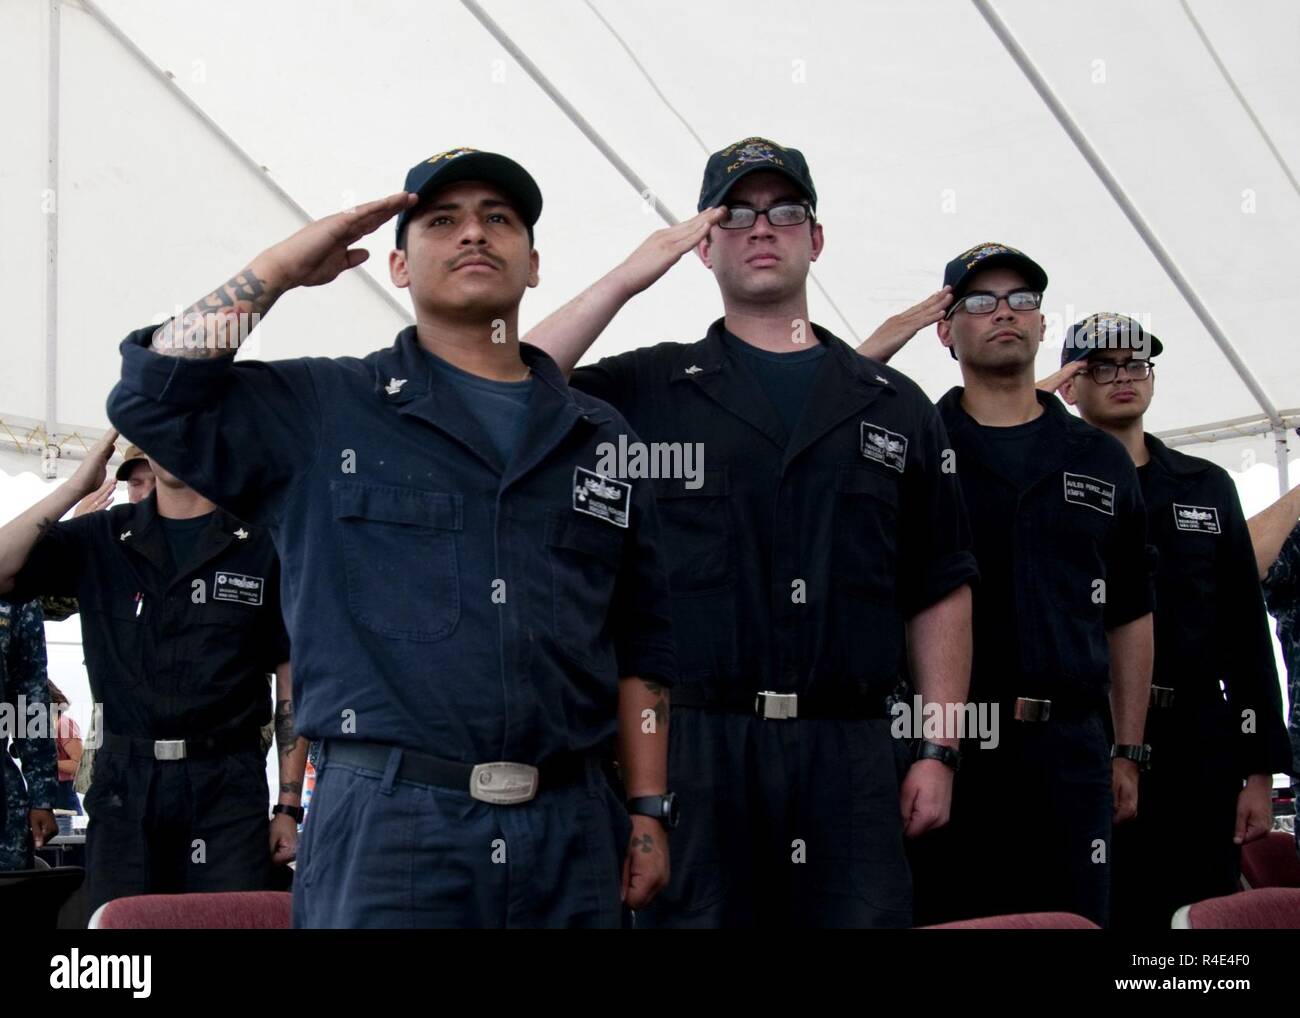 MANAMA, Bahrain (May 1, 2017) Sailors assigned to the Cyclone-class coastal patrol ship (PC) USS Whirlwind (PC 11) salute the ensign during the national anthem during the ship's change of command ceremony at Naval Support Activity Bahrain. The primary mission of the PCs is maritime security operations, and Whirlwind is one of 10 PCs forward deployed to Manama, Bahrain. Stock Photo